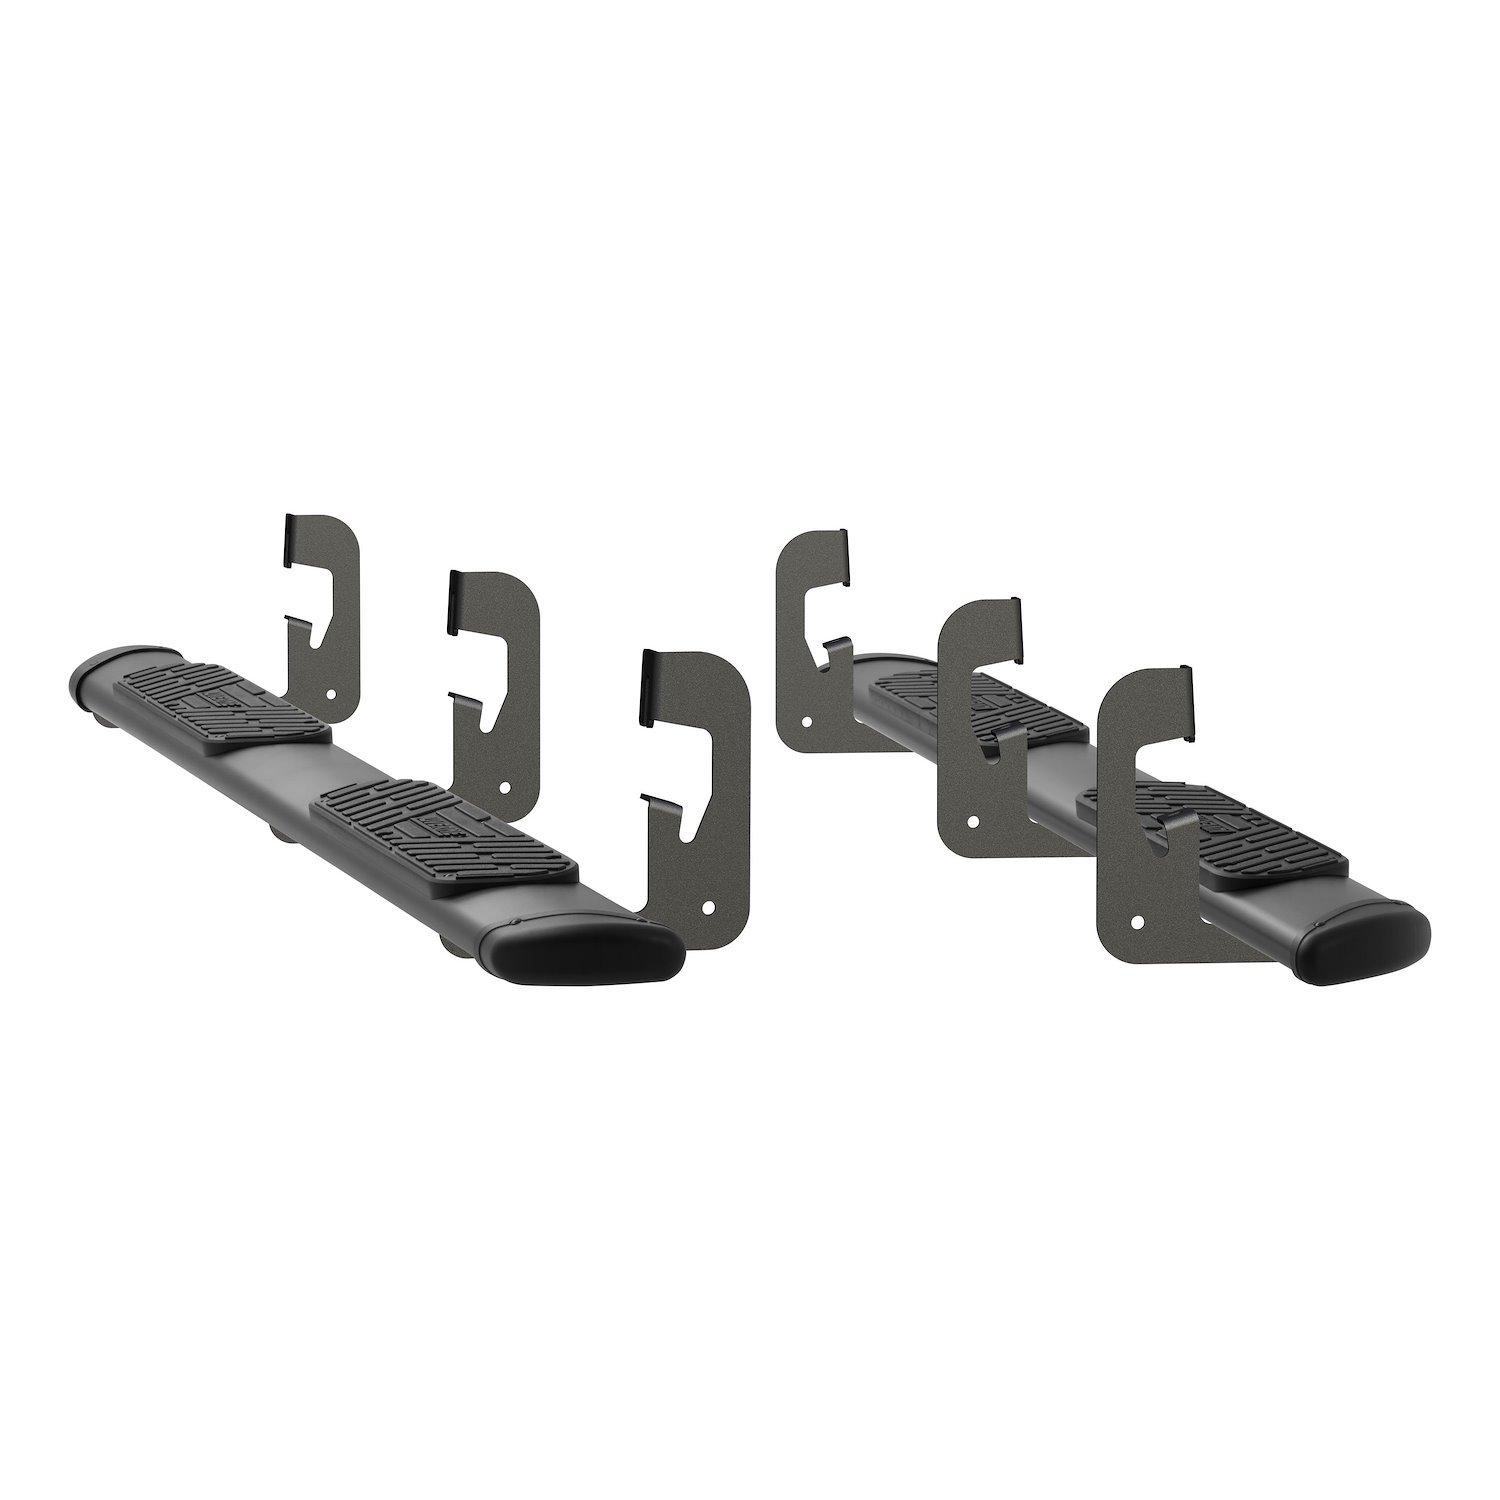 277088-401443 Regal 7 Black Stainless 88 in. Oval Side Steps Fits Select Chevy Silverado, GMC Sierra